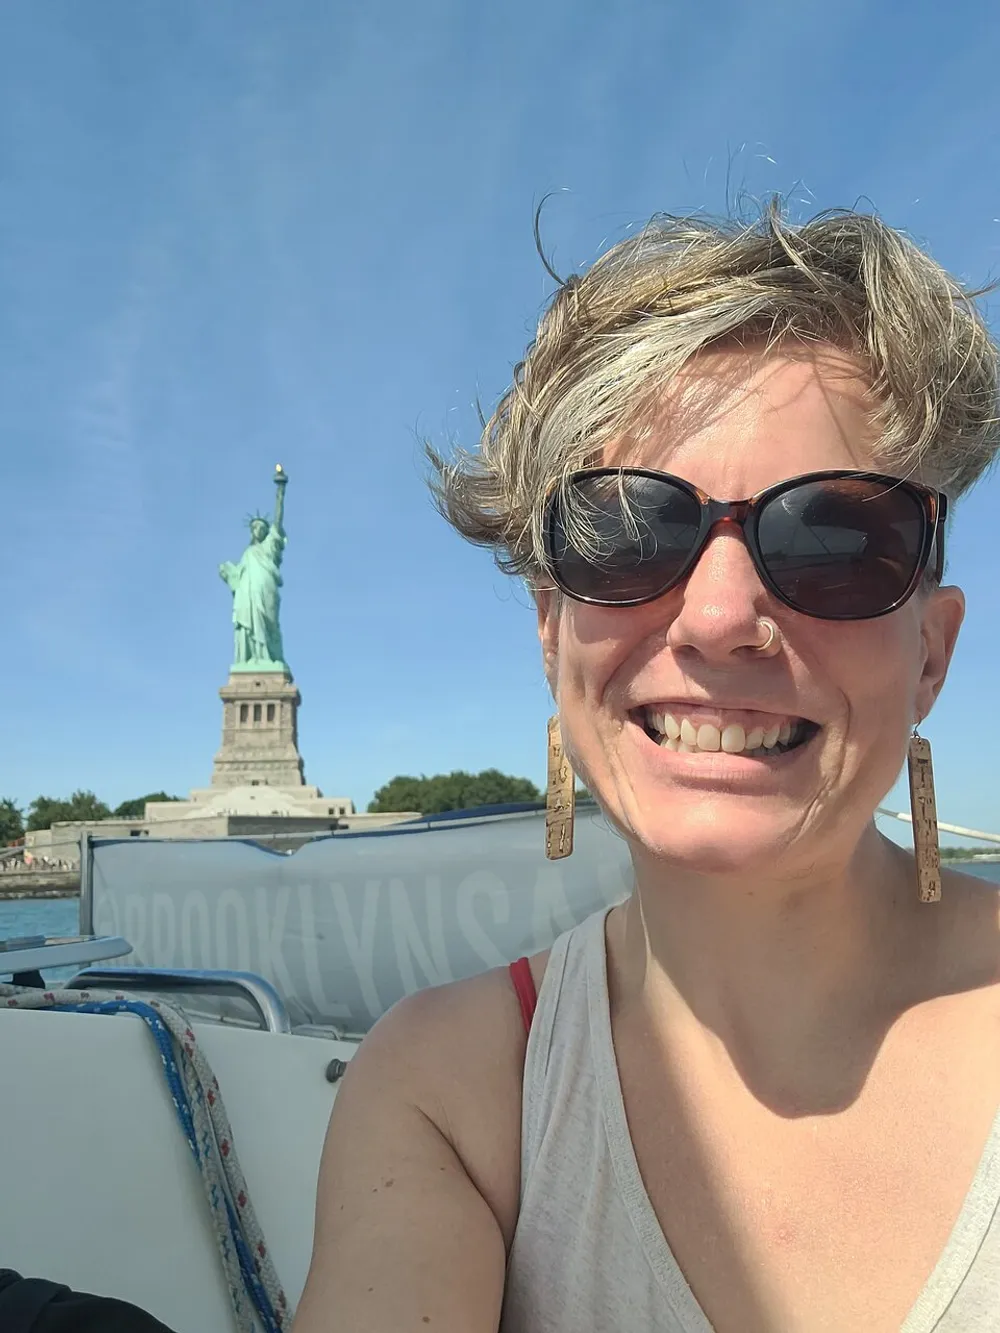 A person is taking a selfie with the Statue of Liberty in the background apparently on a boat